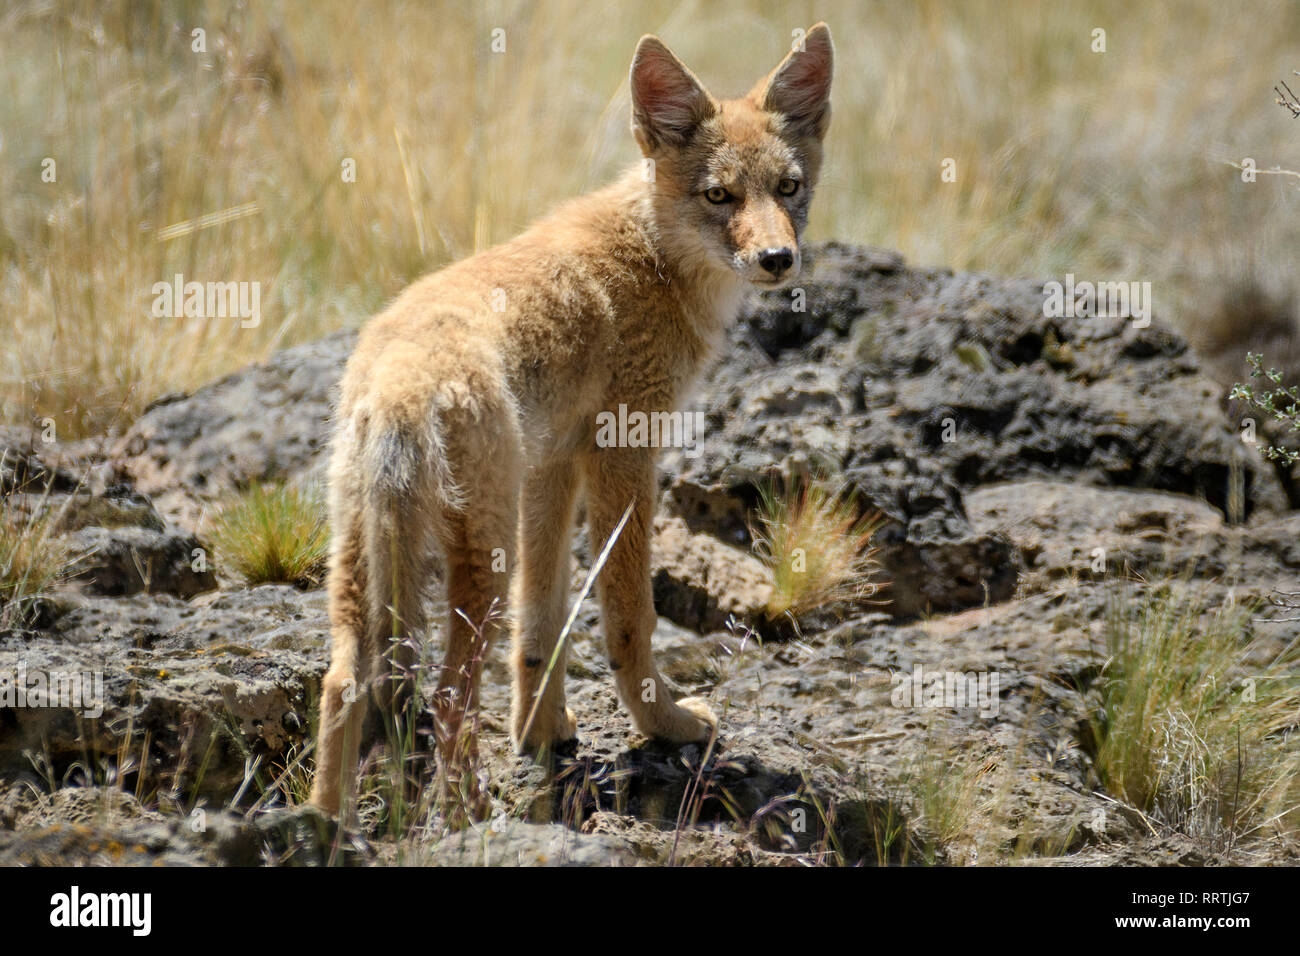 North America, American, America, USA, Pacific Northwest, Oregon, Central Oregon, Bend, Deschutes National Forest, Coyote, Canis Lupins Stock Photo